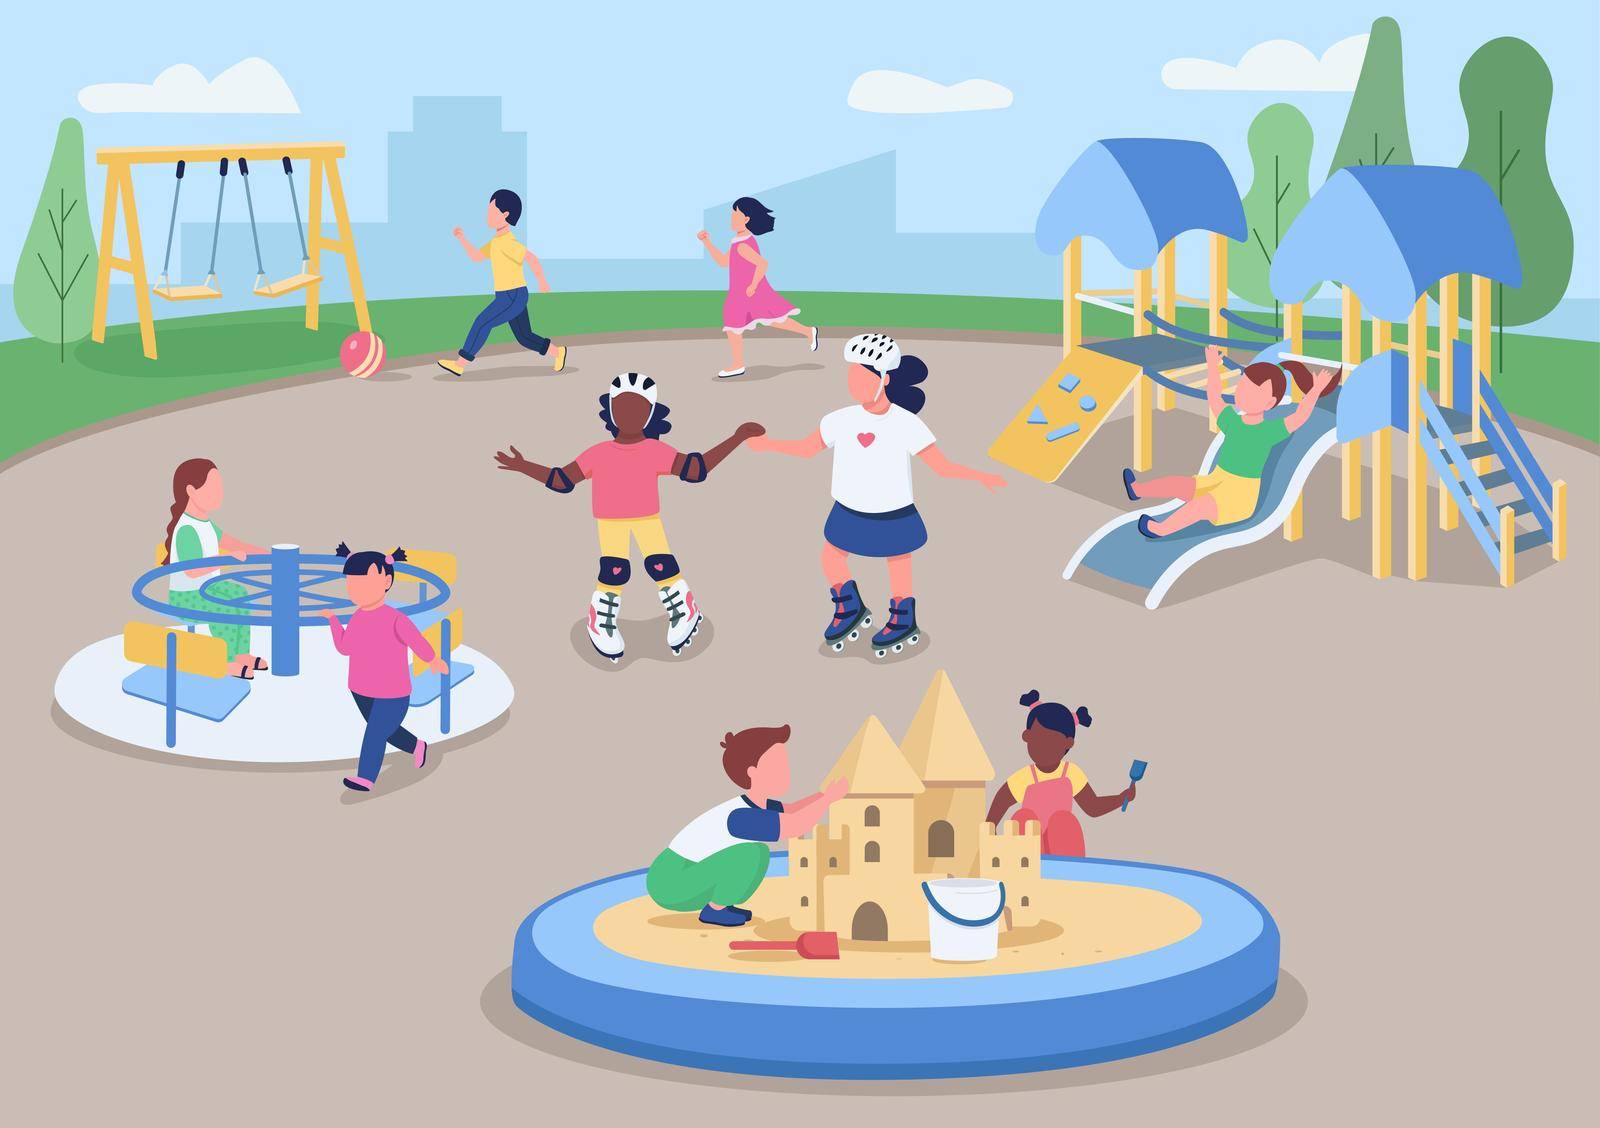 Outdoor playground flat color vector illustration. Kids having fun outside. Preschoolers playing together. Kindergarten ground 2D cartoon characters with urban landscape on background